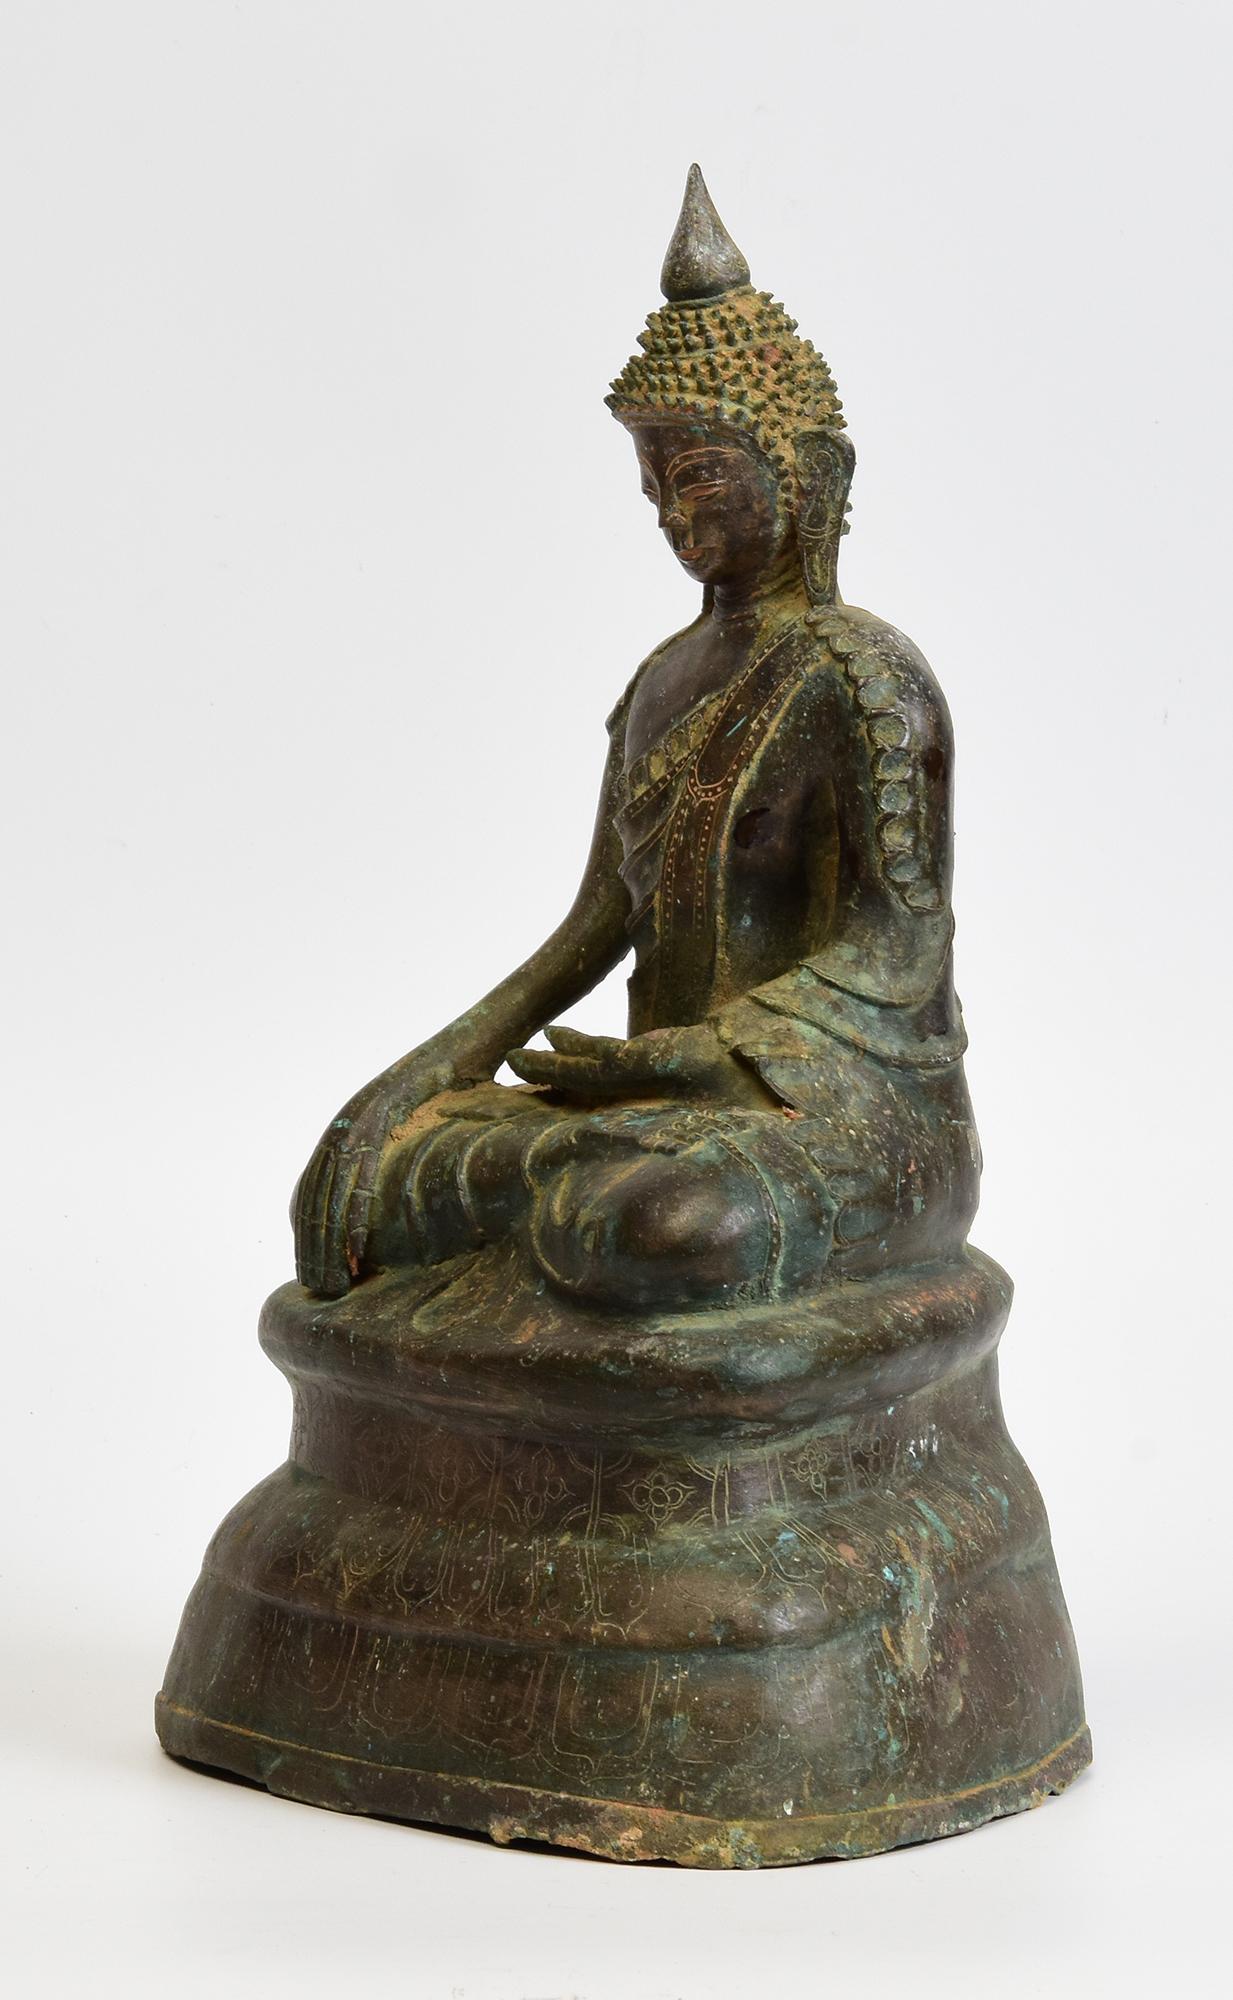 17th Century, Early Shan, Rare Antique Burmese Bronze Seated Buddha For Sale 1